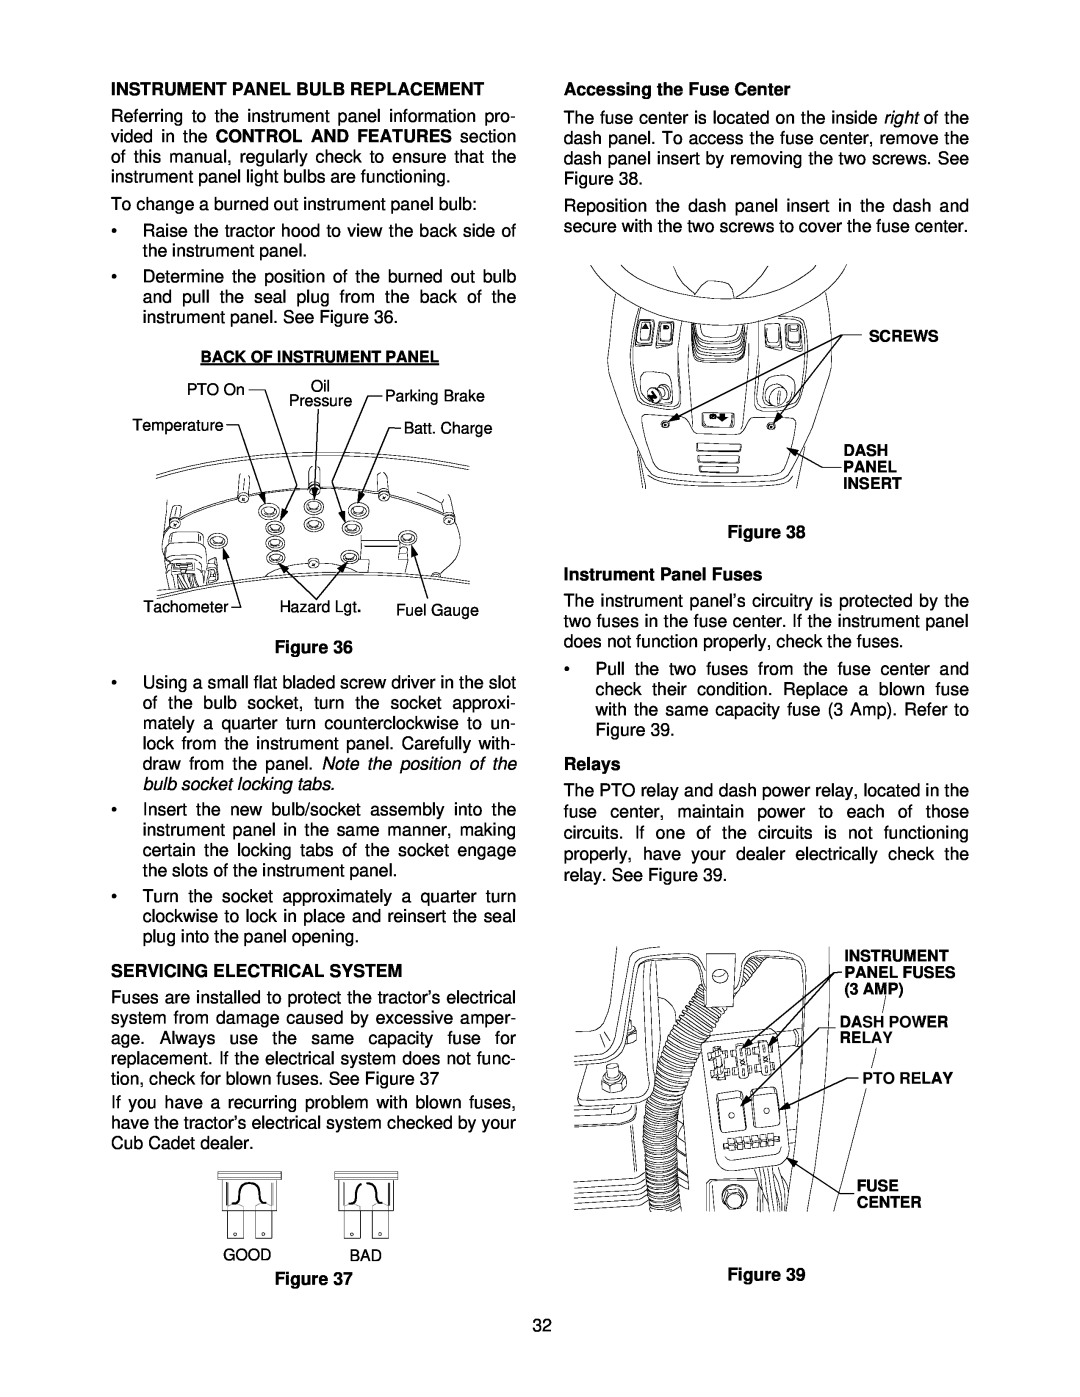 Cub Cadet 7252 manual Instrument Panel Bulb Replacement, Servicing Electrical System, Accessing the Fuse Center, Relays 